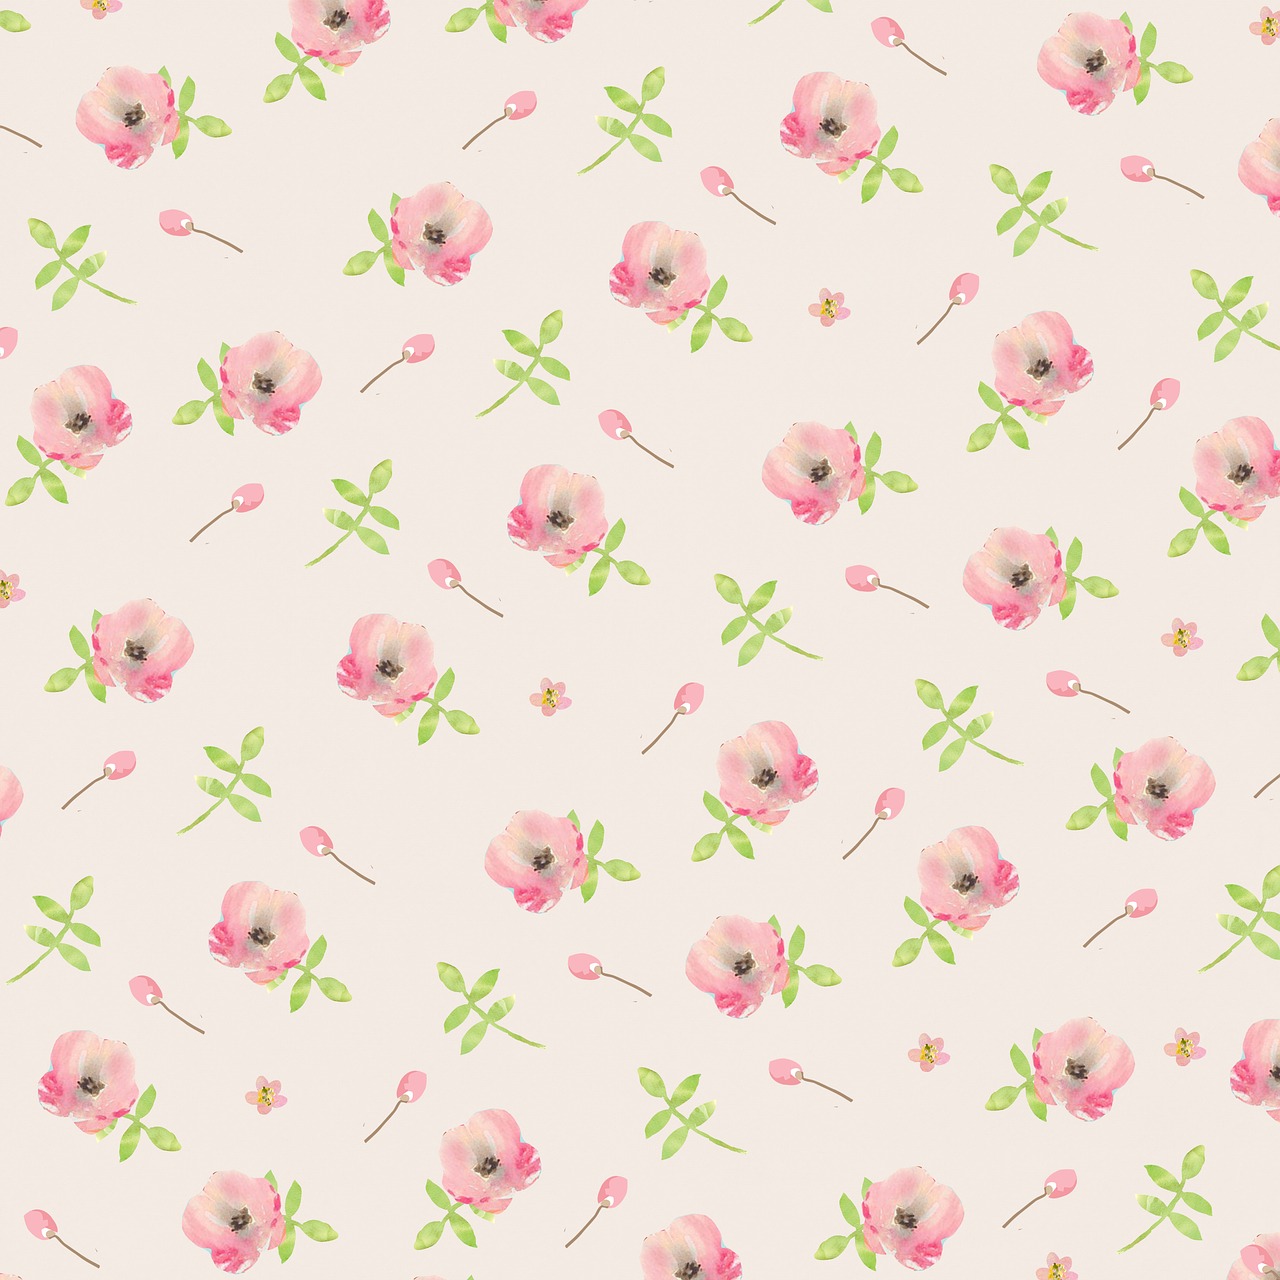 floral pattern floral background floral paper free photo